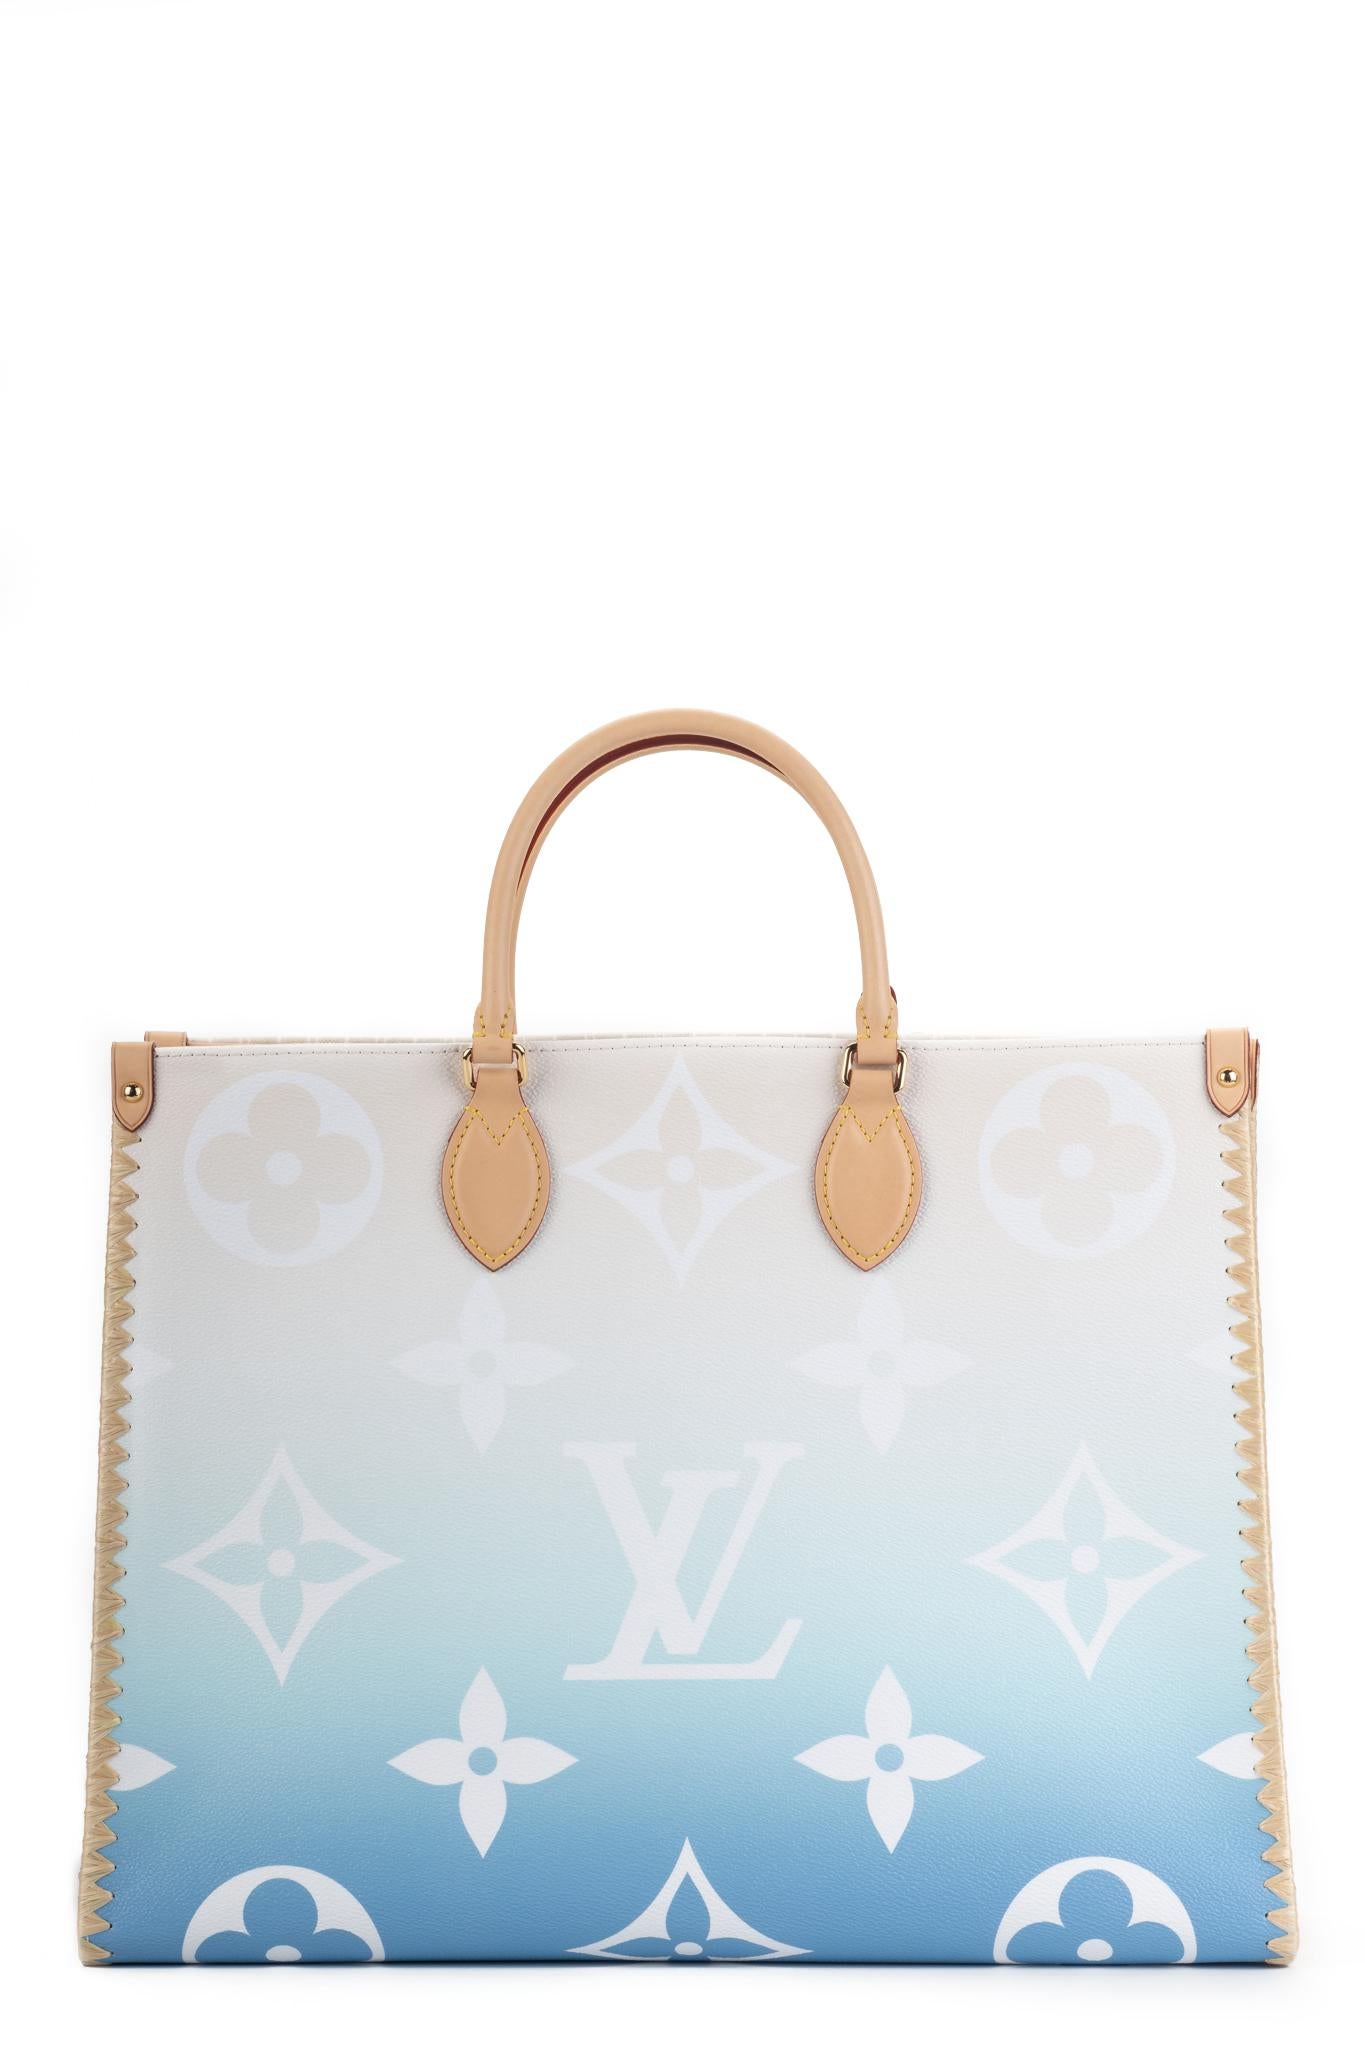 New Louis Vuitton Limited Edition On The Go Capri Ombre Bag 1